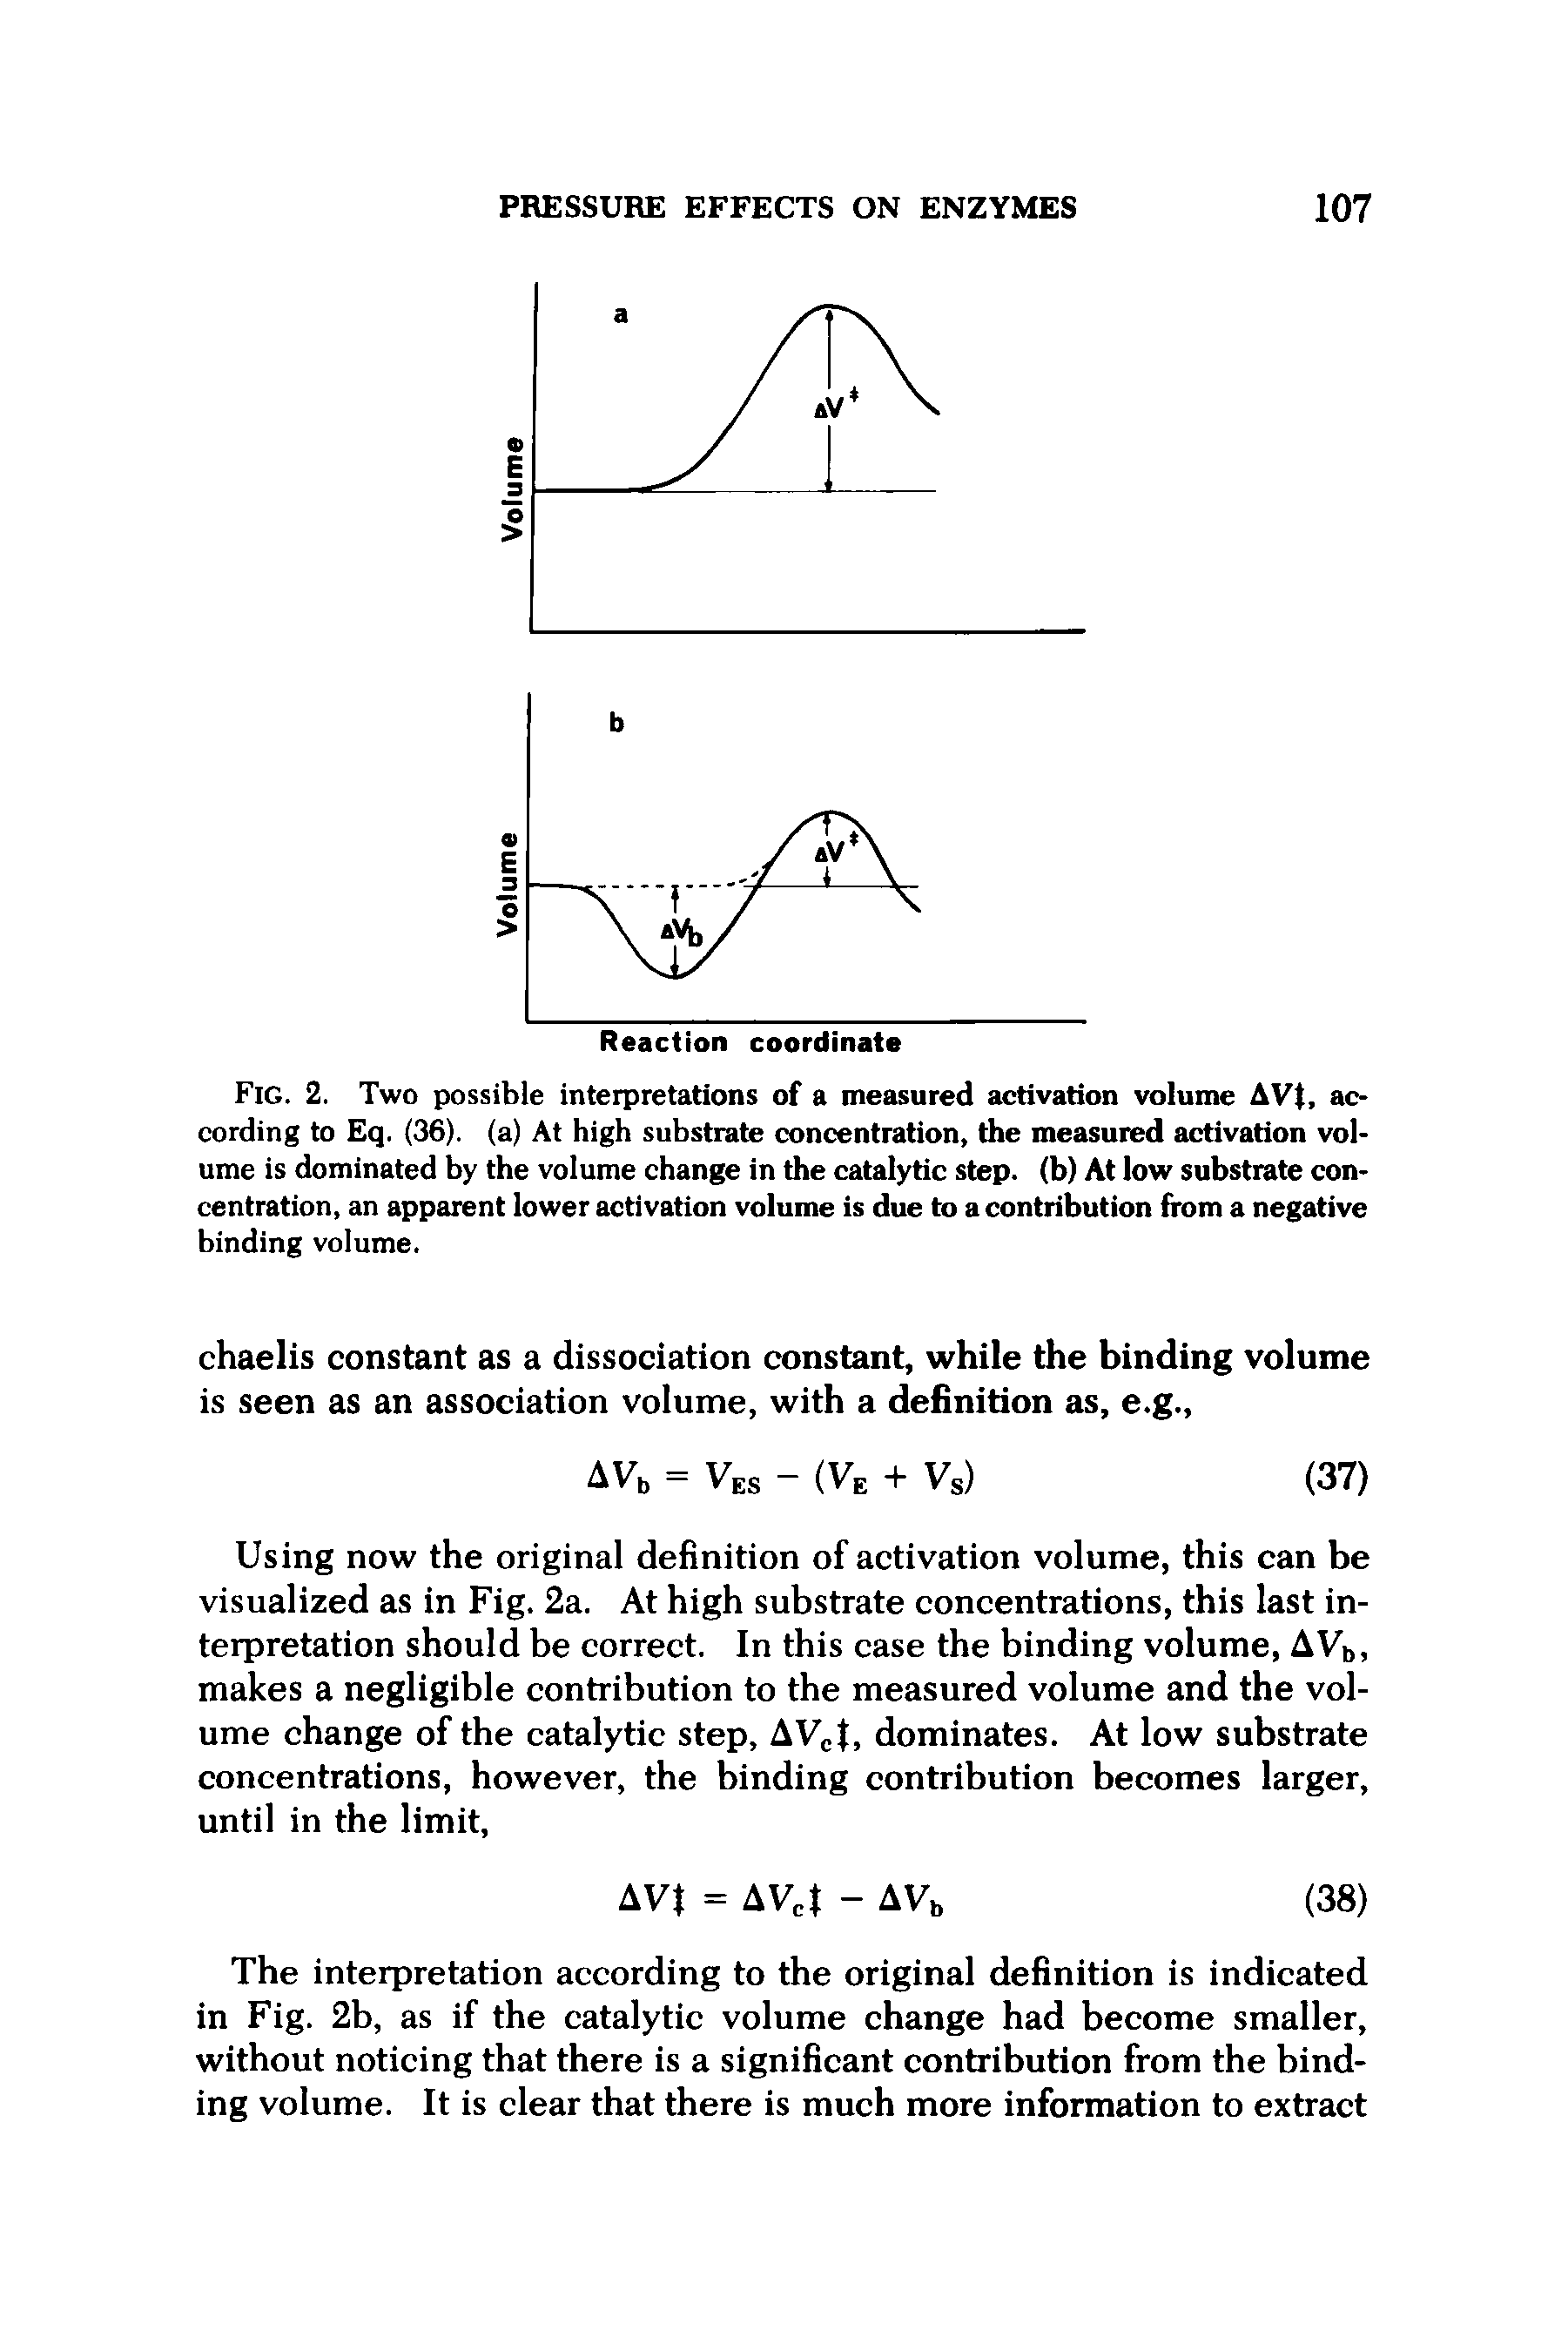 Fig. 2. Two possible interpretations of a measured activation volume AVI, according to Eq. (36). (a) At high substrate concentration, the measured activation volume is dominated by the volume change in the catalytic step, (b) At low substrate concentration, an apparent lower activation volume is due to a contribution from a negative binding volume.